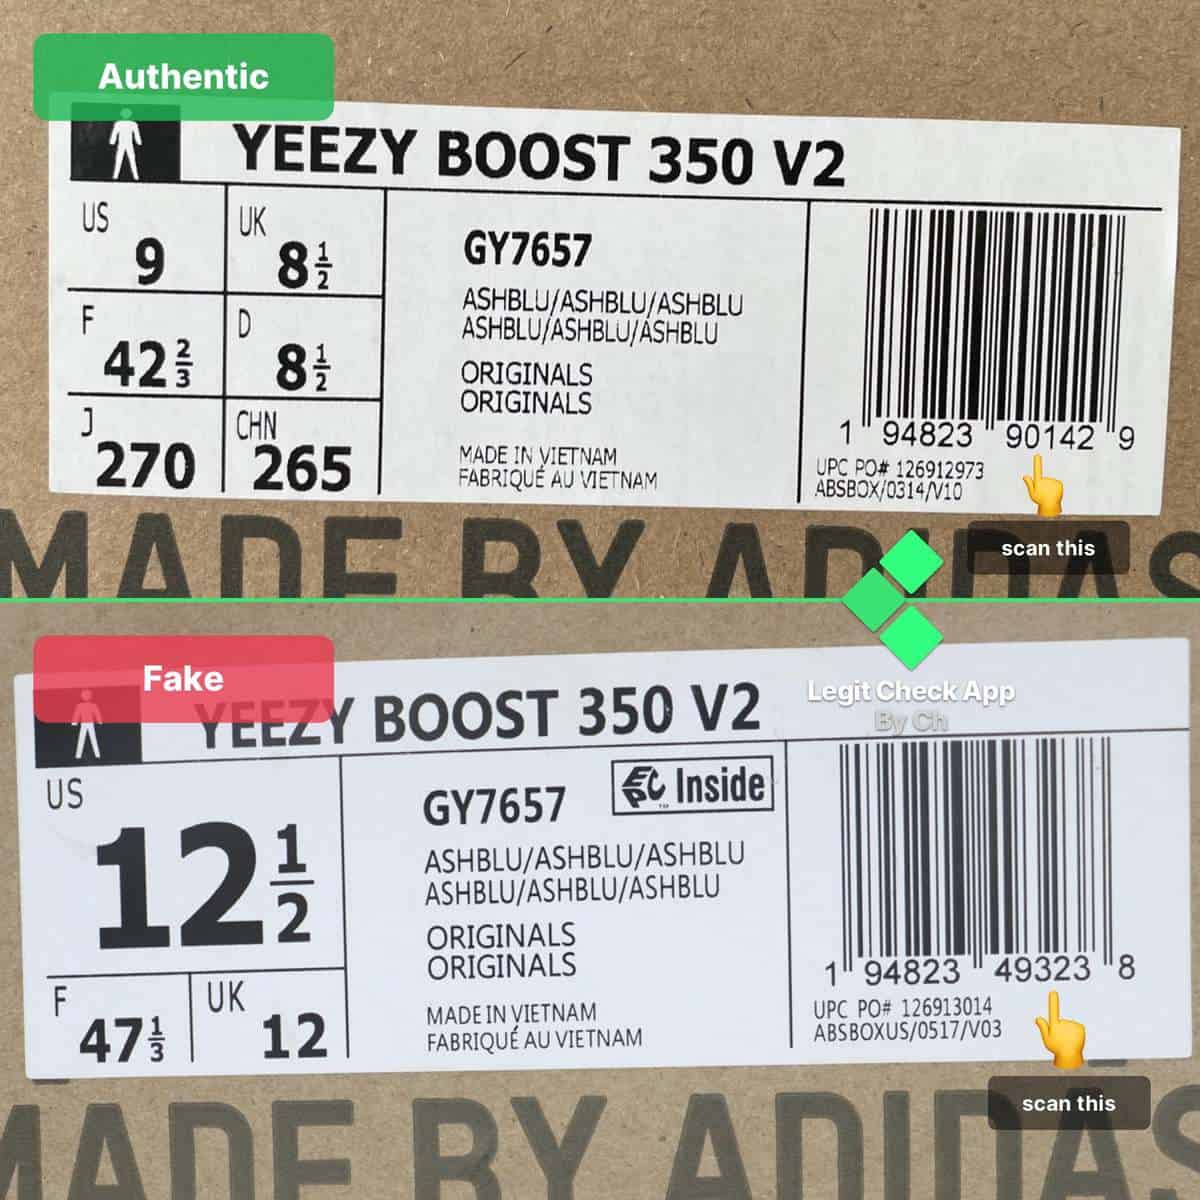 yeezy shoes are made in